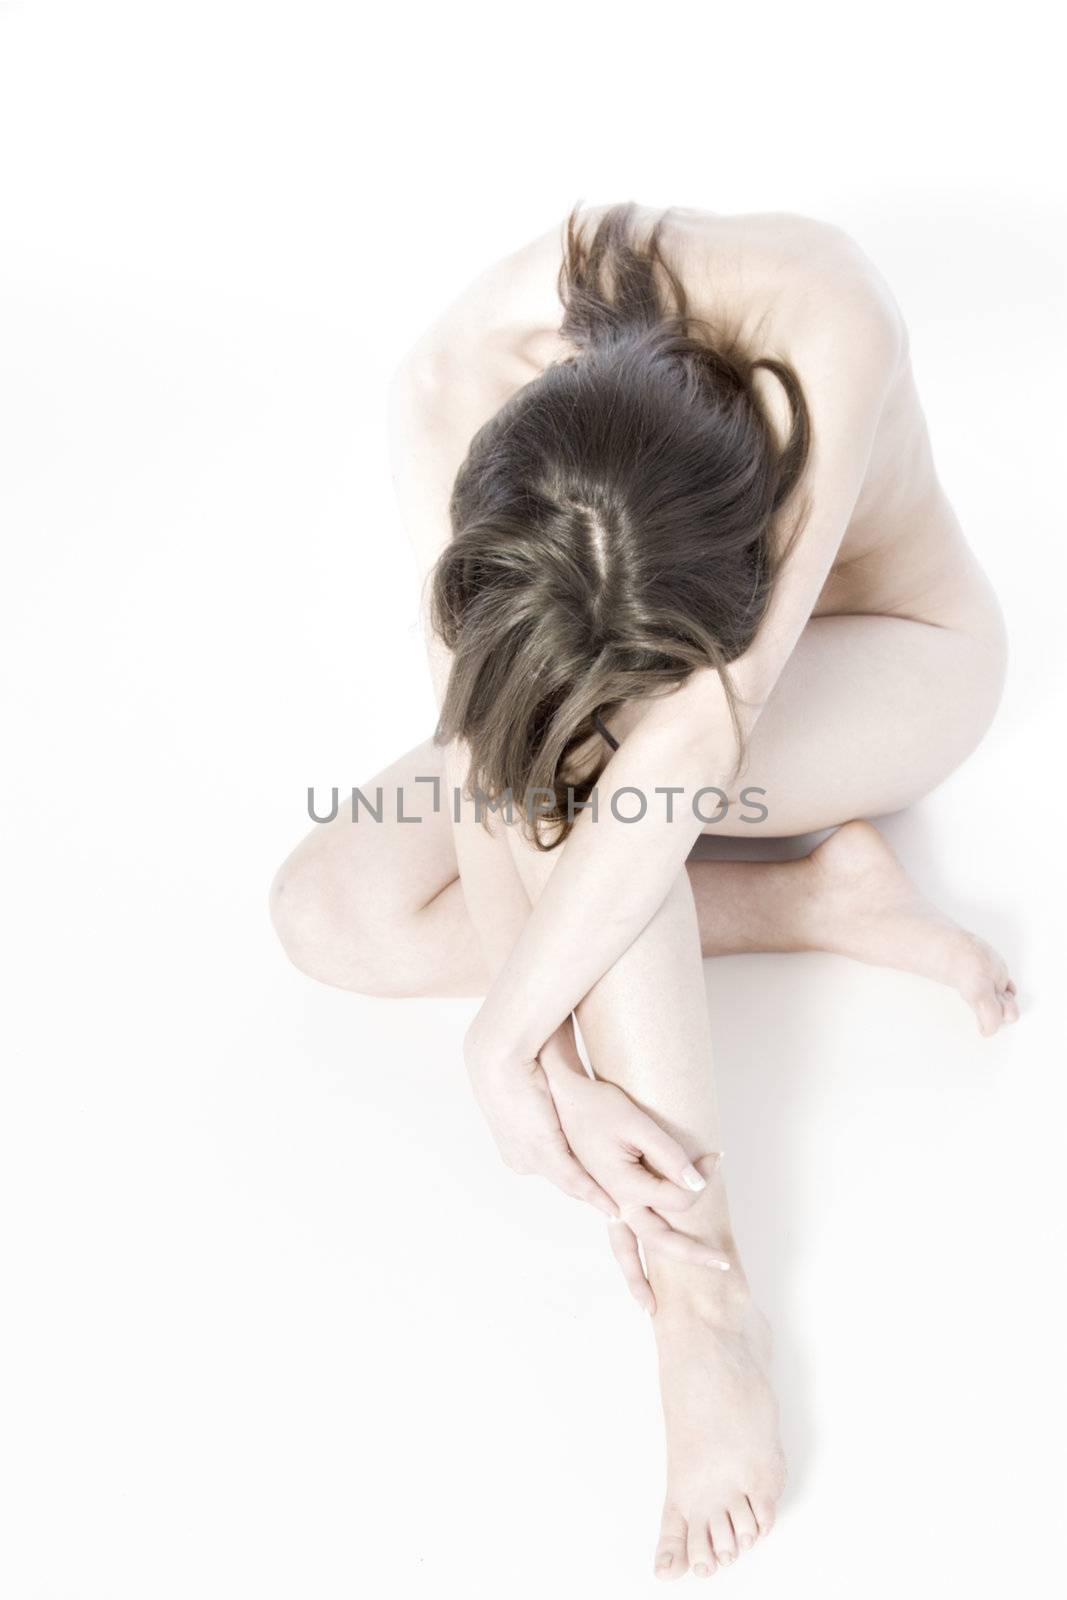 An artistic naked portrait of a woman cuddled up